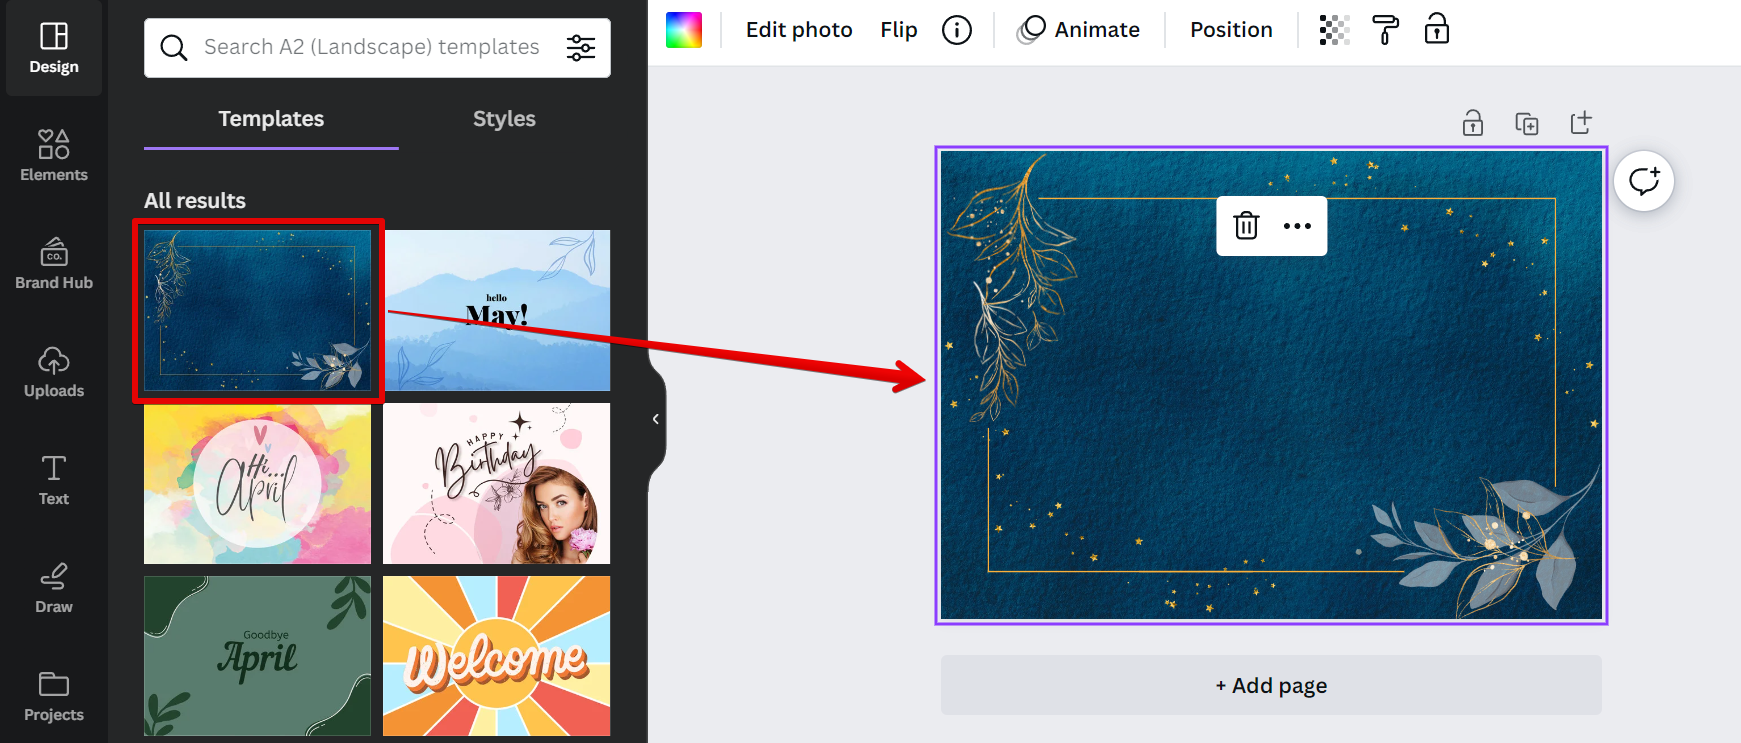 How do I search for templates in Canva?